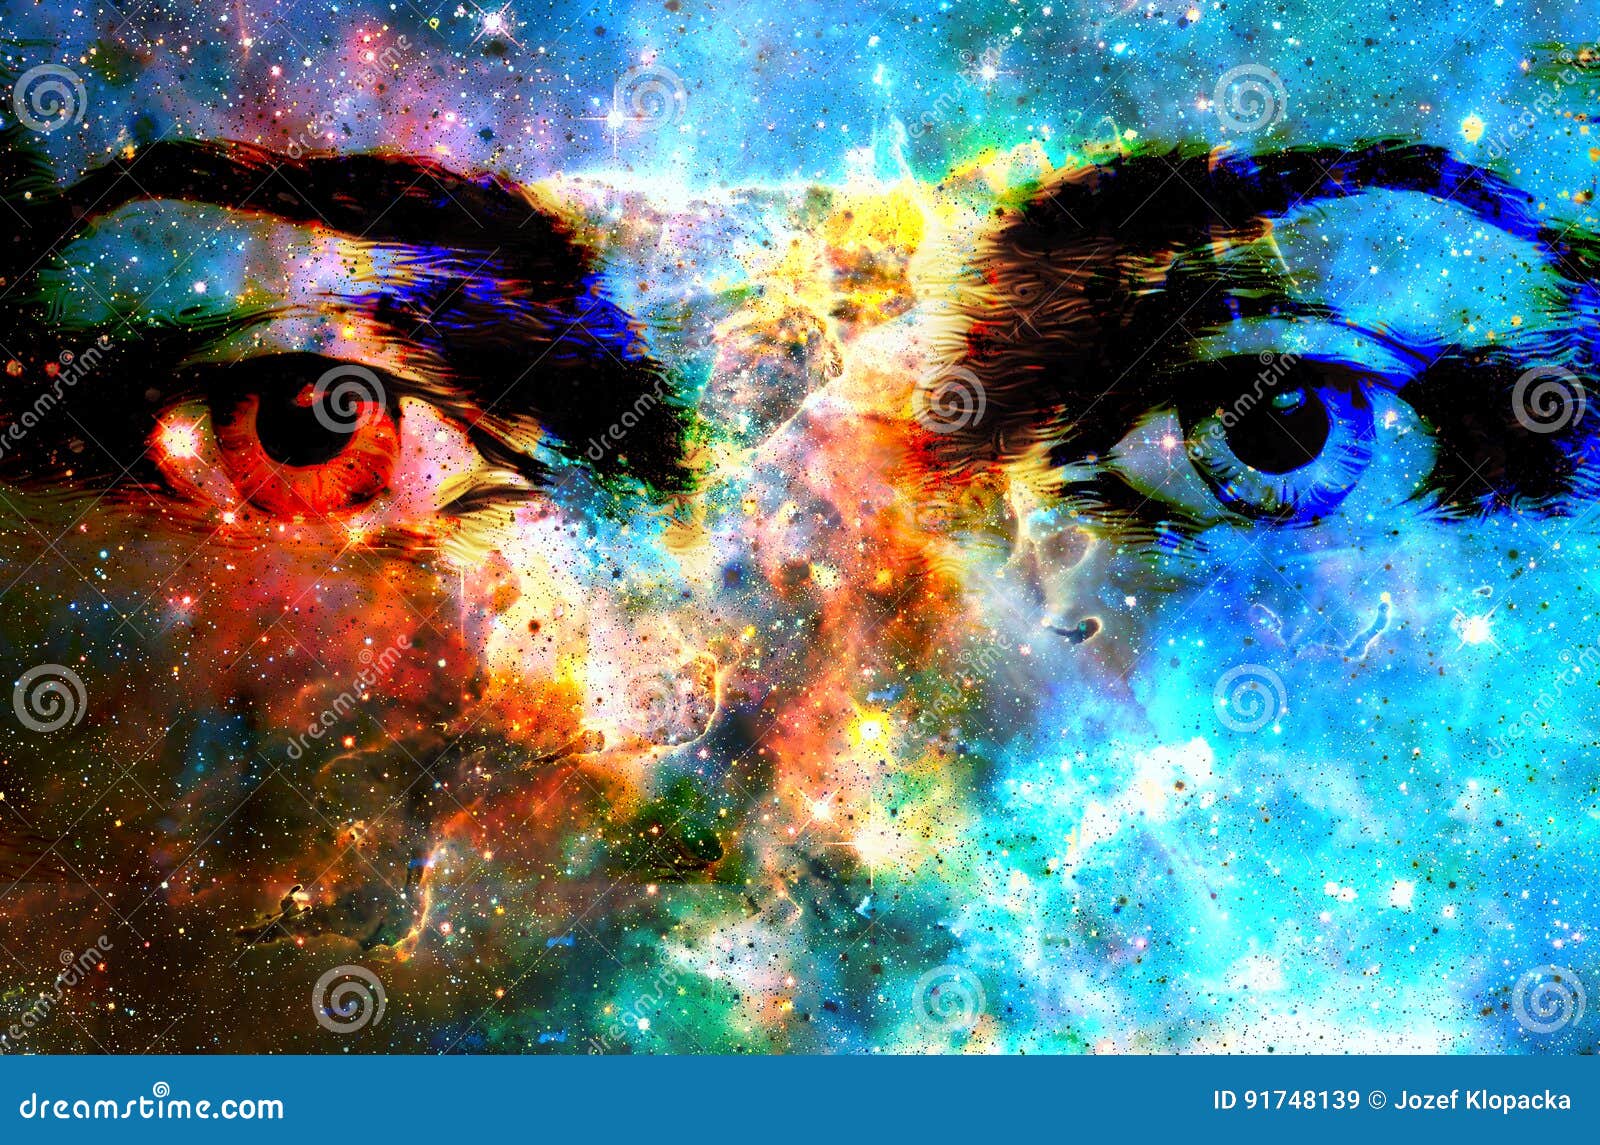 jesus eye in cosmic space. computer collage version.